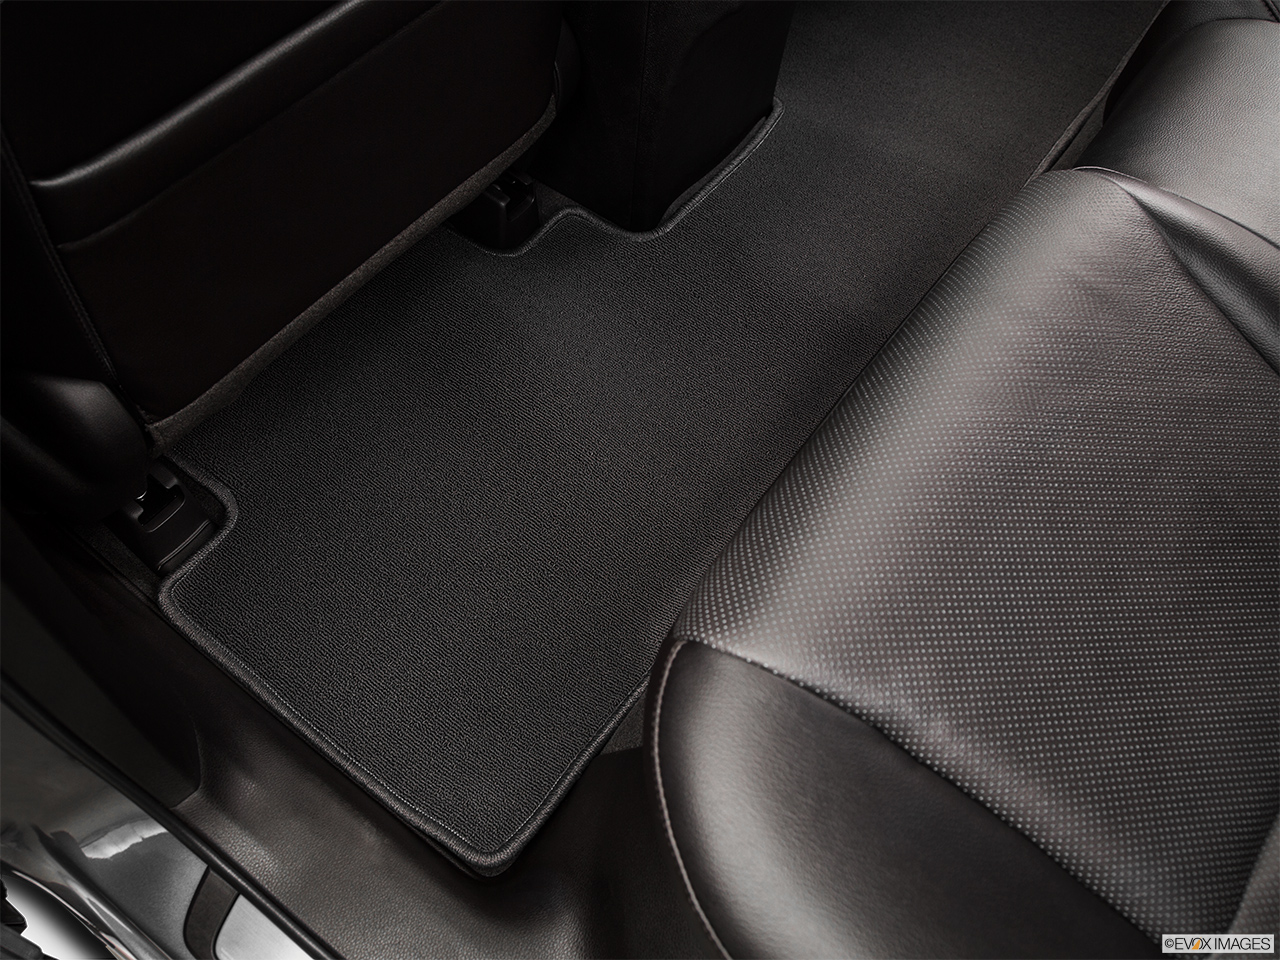 2015 Acura RDX AWD Rear driver's side floor mat. Mid-seat level from outside looking in. 